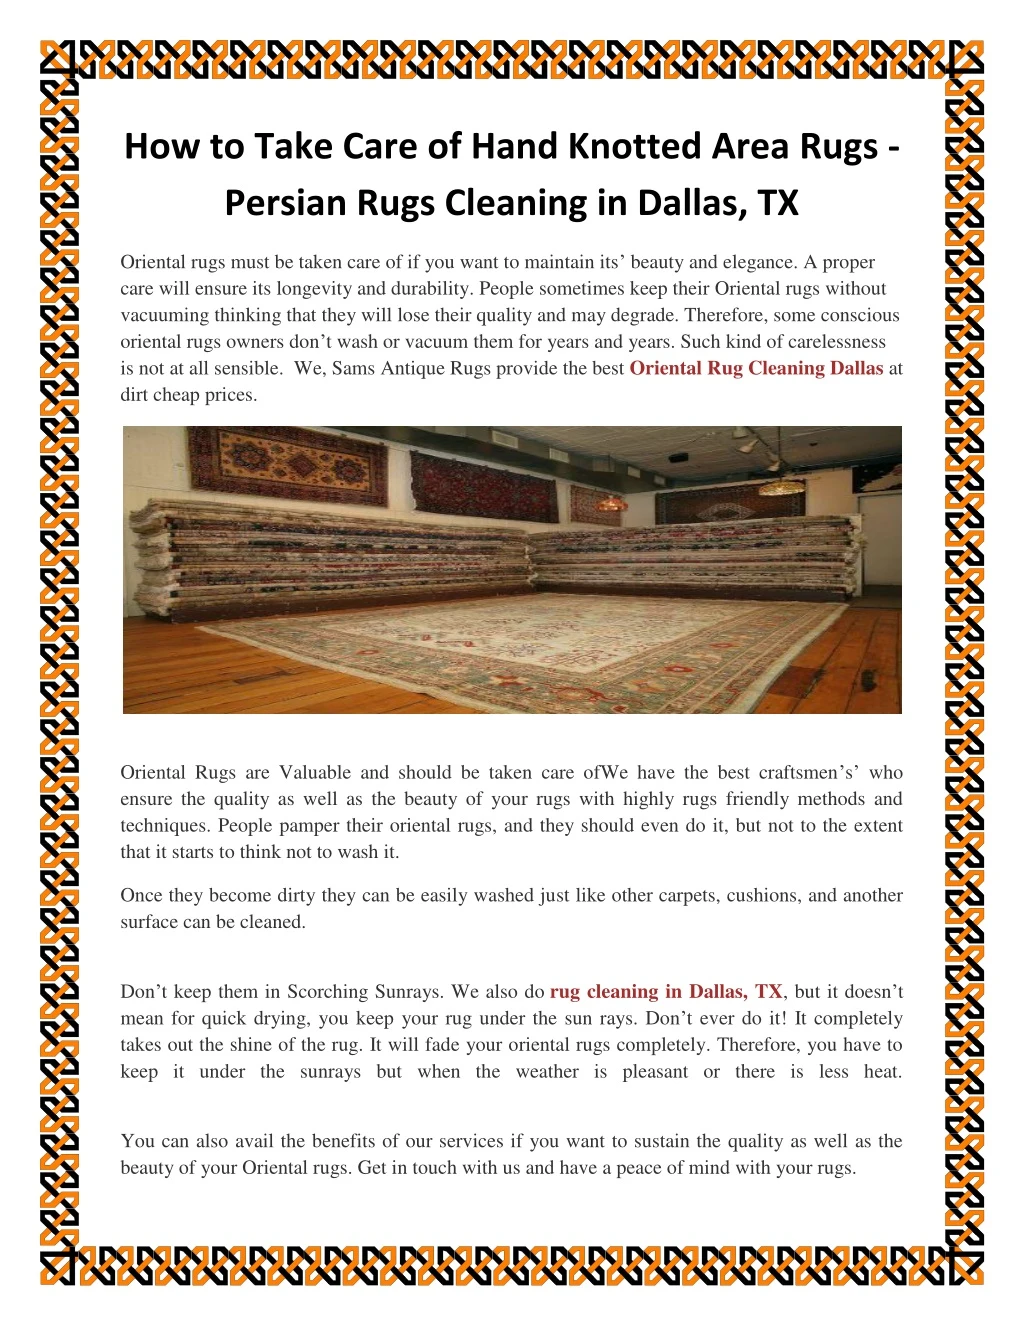 how to take care of hand knotted area rugs